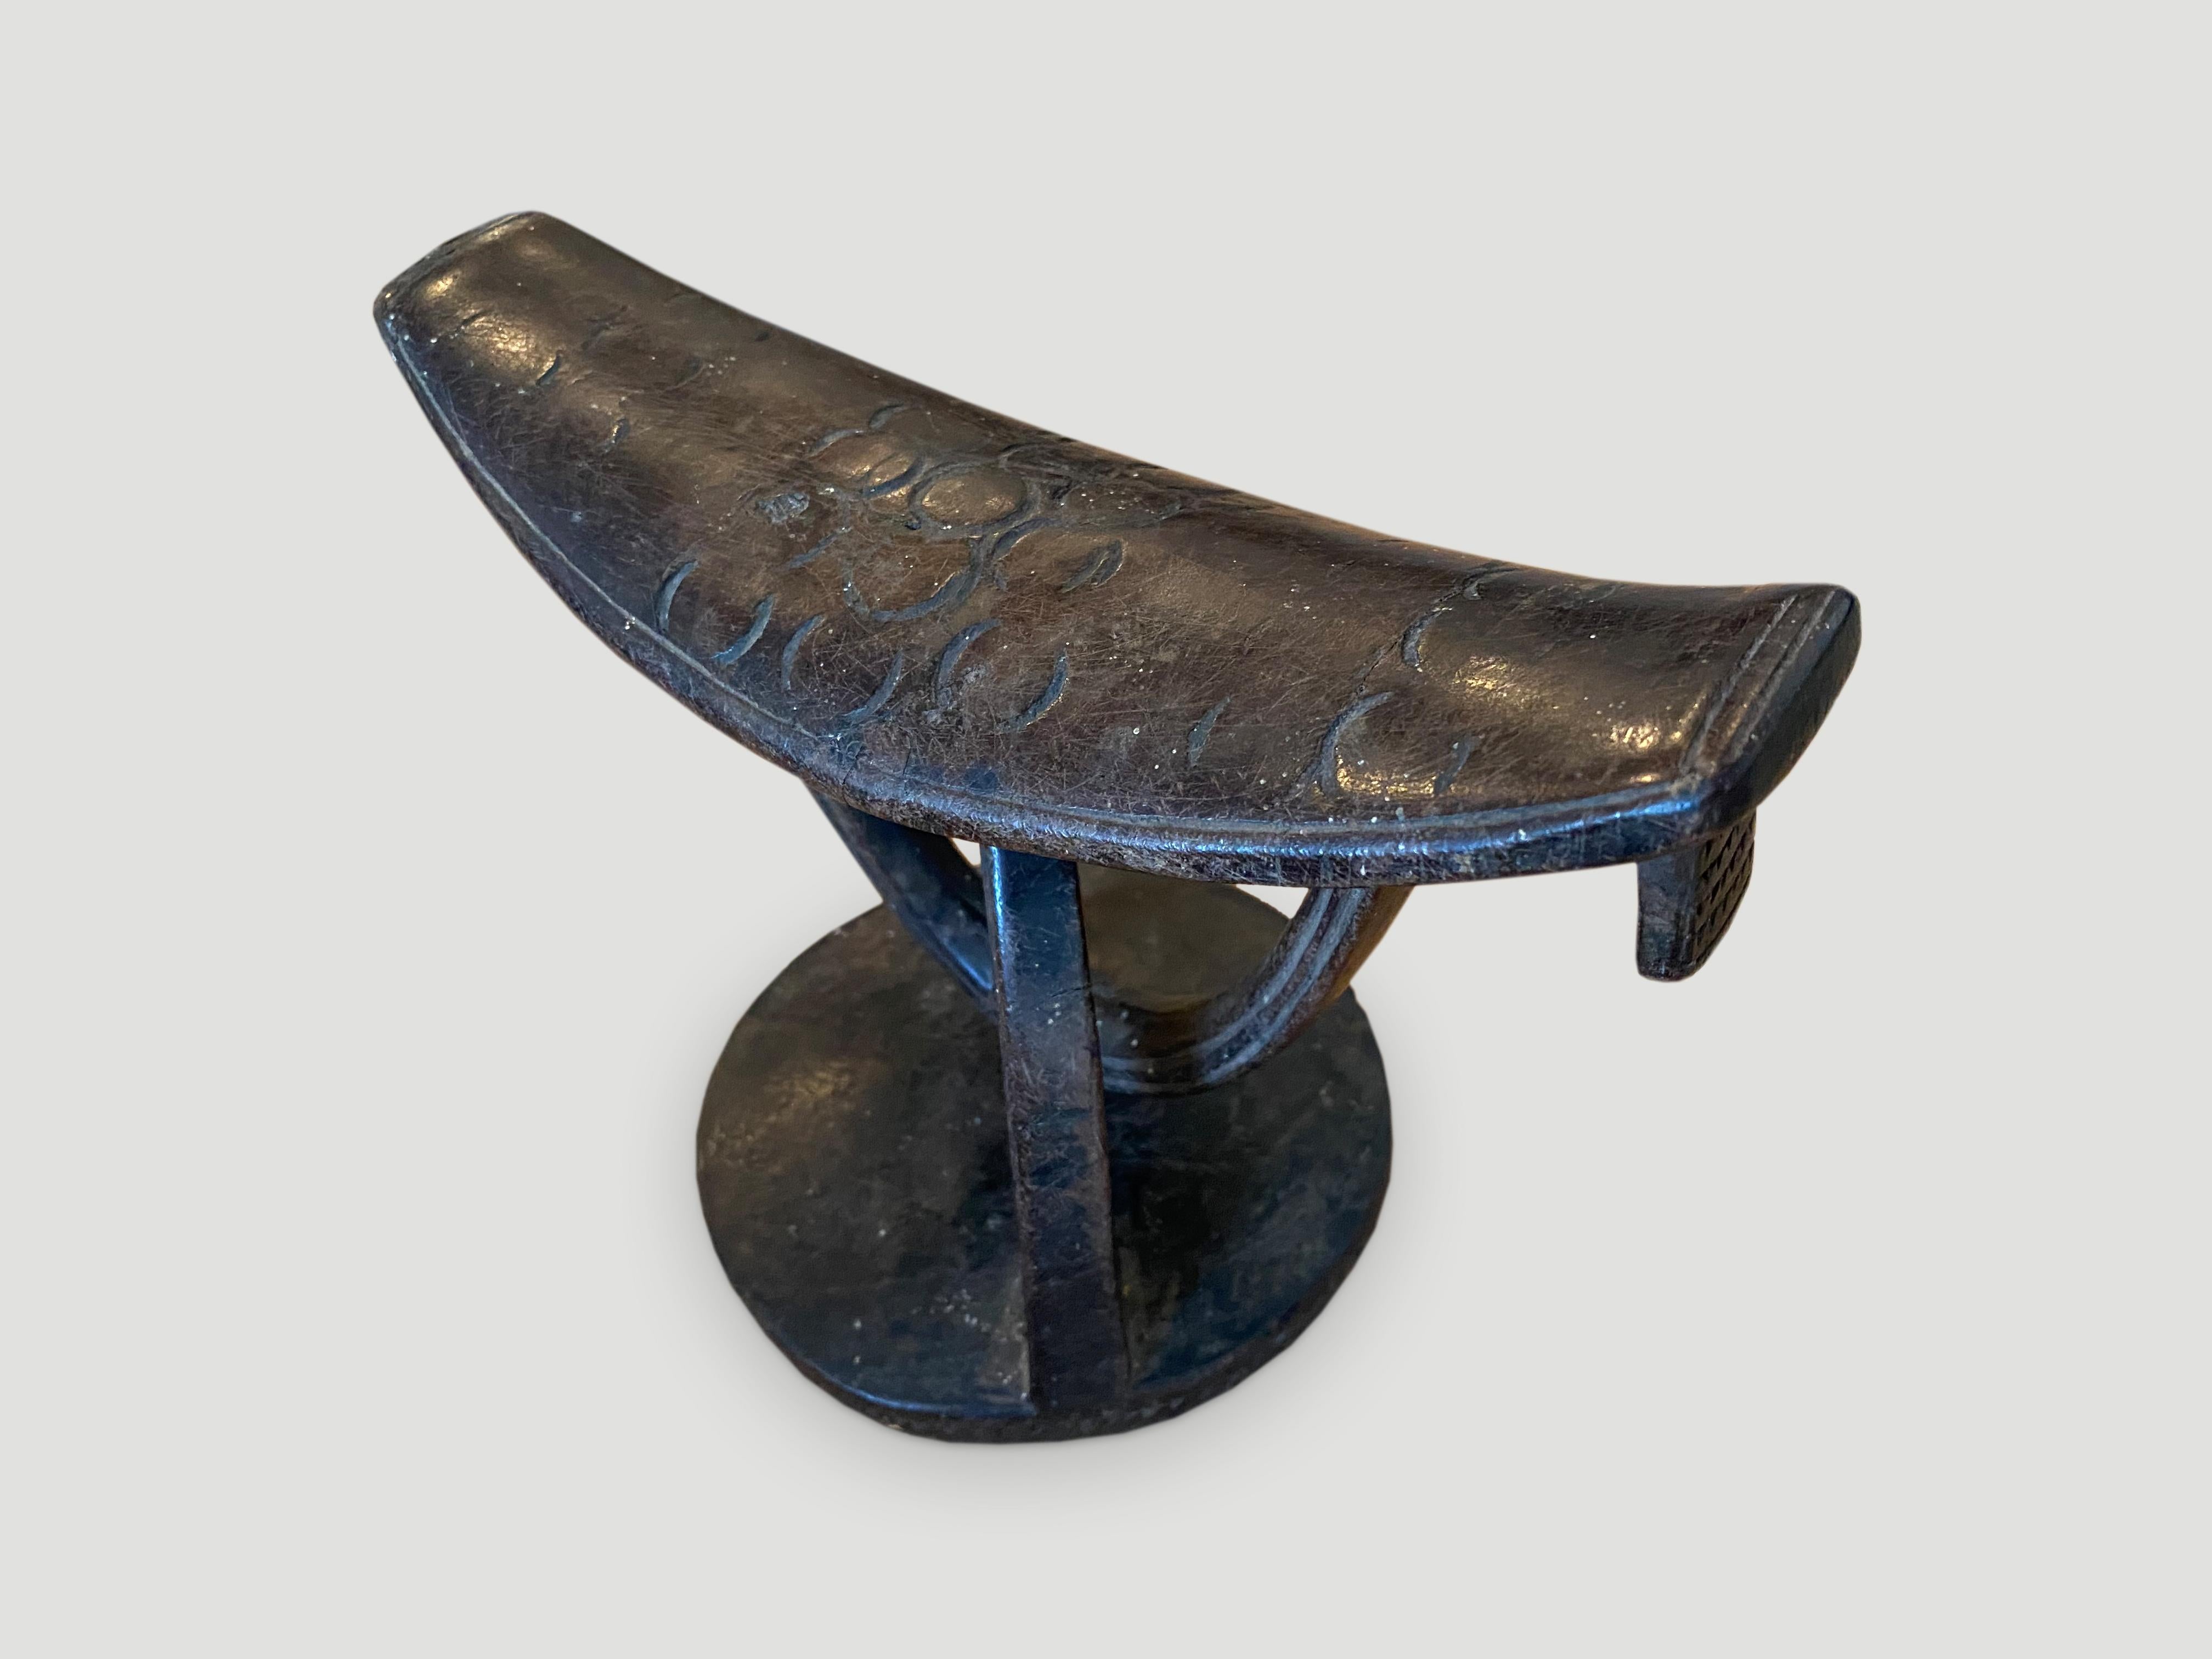 Rare. Beautiful museum quality hand carved wooden head rest. Stunning patina on this unusual head rest that rotates. Circa 1900.

This head rest was sourced in the spirit of wabi-sabi, a Japanese philosophy that beauty can be found in imperfection